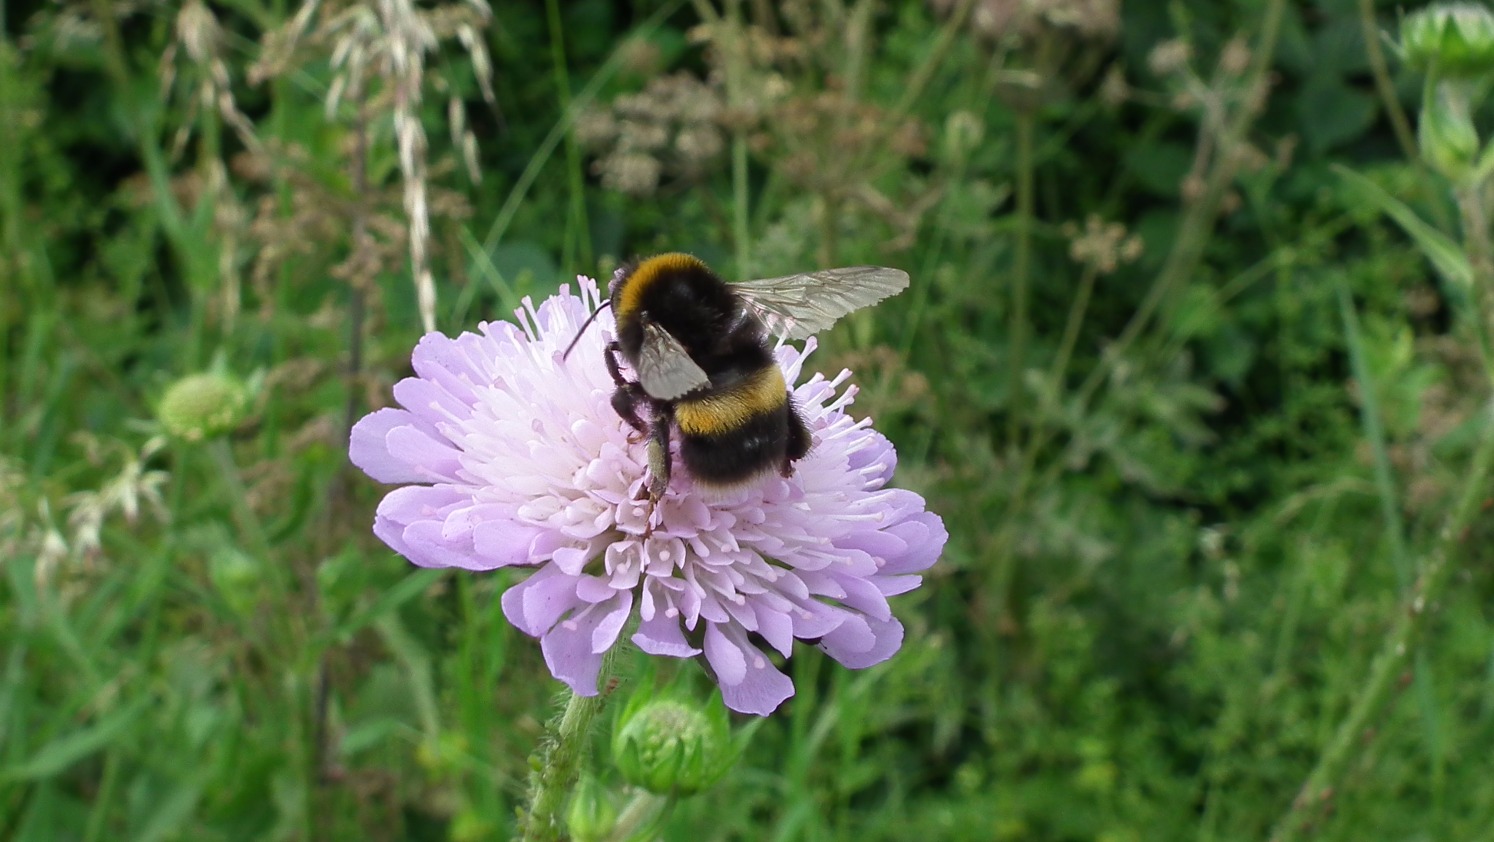 Busy Bee - Flowers, Green | Grass | Flower | Purple | Lilac | Countryside | Bee | Insect | Winged | Wing